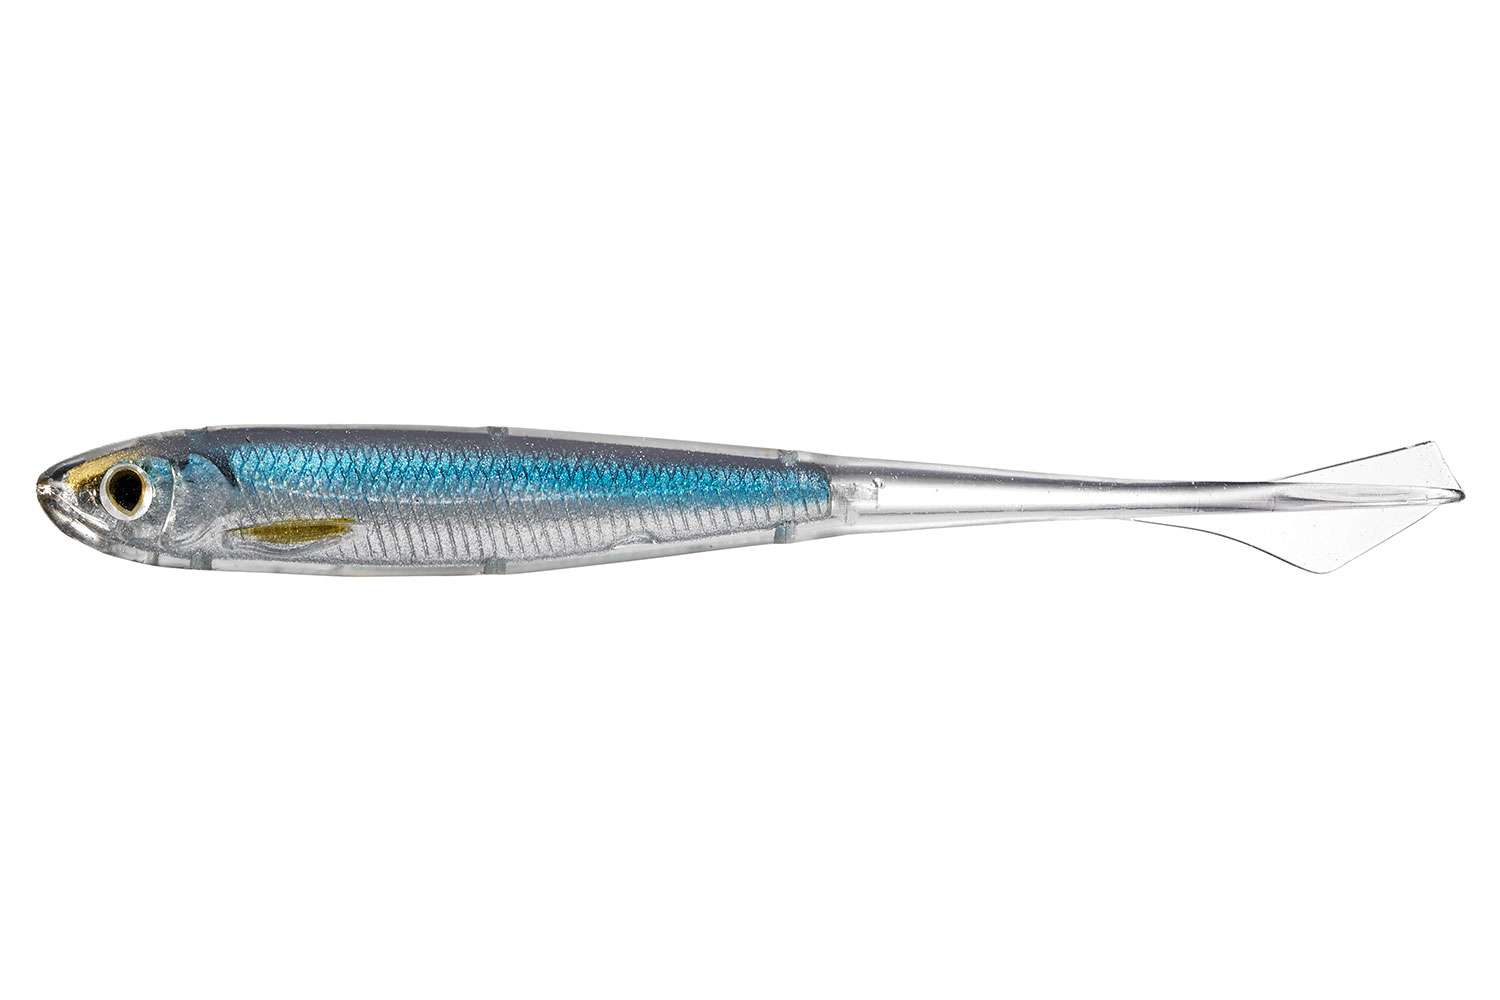   <B>Livetarget Ghost Tail Minnow</B>
<BR>The Ghost Tail Minnow is a drop-shot bait that mimics a minnow feeding near bottom structure. It features Injected Core Technology (ICT), enabling the Inner-Core to host a life-like Minnow profile, while the Exo-Skin gives the lure its signature finesse action. Proprietary metal powder provides vibrant metallic flash and realism, and the unique tail design generates a finesse quivering action, emulating the movement of a small minnow. Requires only the slightest rod tip movement for a life-like presentation. Ghost Tail Minnows are available in 3-, 4- and 5-inch slow-sink sizes and six natural-themed color patterns.
<BR>
<B>MSRP: $9.99</B> 
<br>
<a href=